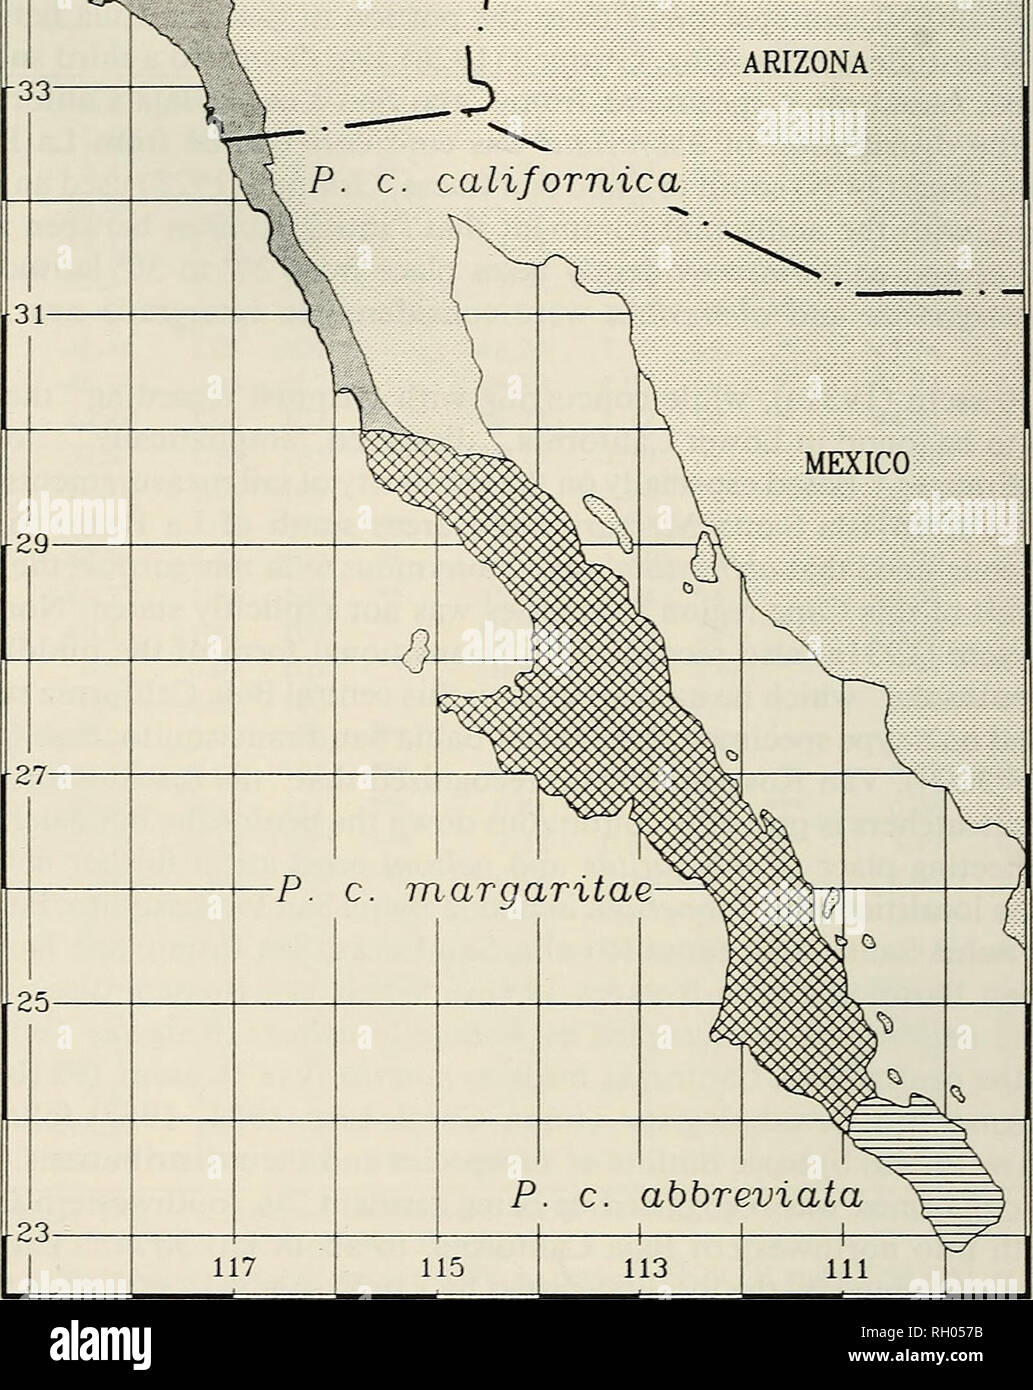 . Bulletin. Science; Natural history; Natural history. 128 SOUTHERN CALIFORNIA ACADEMY OF SCIENCES. V CALIFORNIA 0 50 100 150 200 250 300 350 â â â â¢ tilometers i&gt; ARIZONA {P. c. califomica  Fig. 7. Approximate geographic limits of California Gnatcatcher subspecies. Due to habitat loss, the indicated range of P. c. californica represents historic, not current, distribution. Mapped distri- butions of P. c. margaritae and P. c. abbreviata are similarly approximate, and include various areas characterized by habitat known to be unsuitable for California Gnatcatchers. For discussion of dis- t Stock Photo